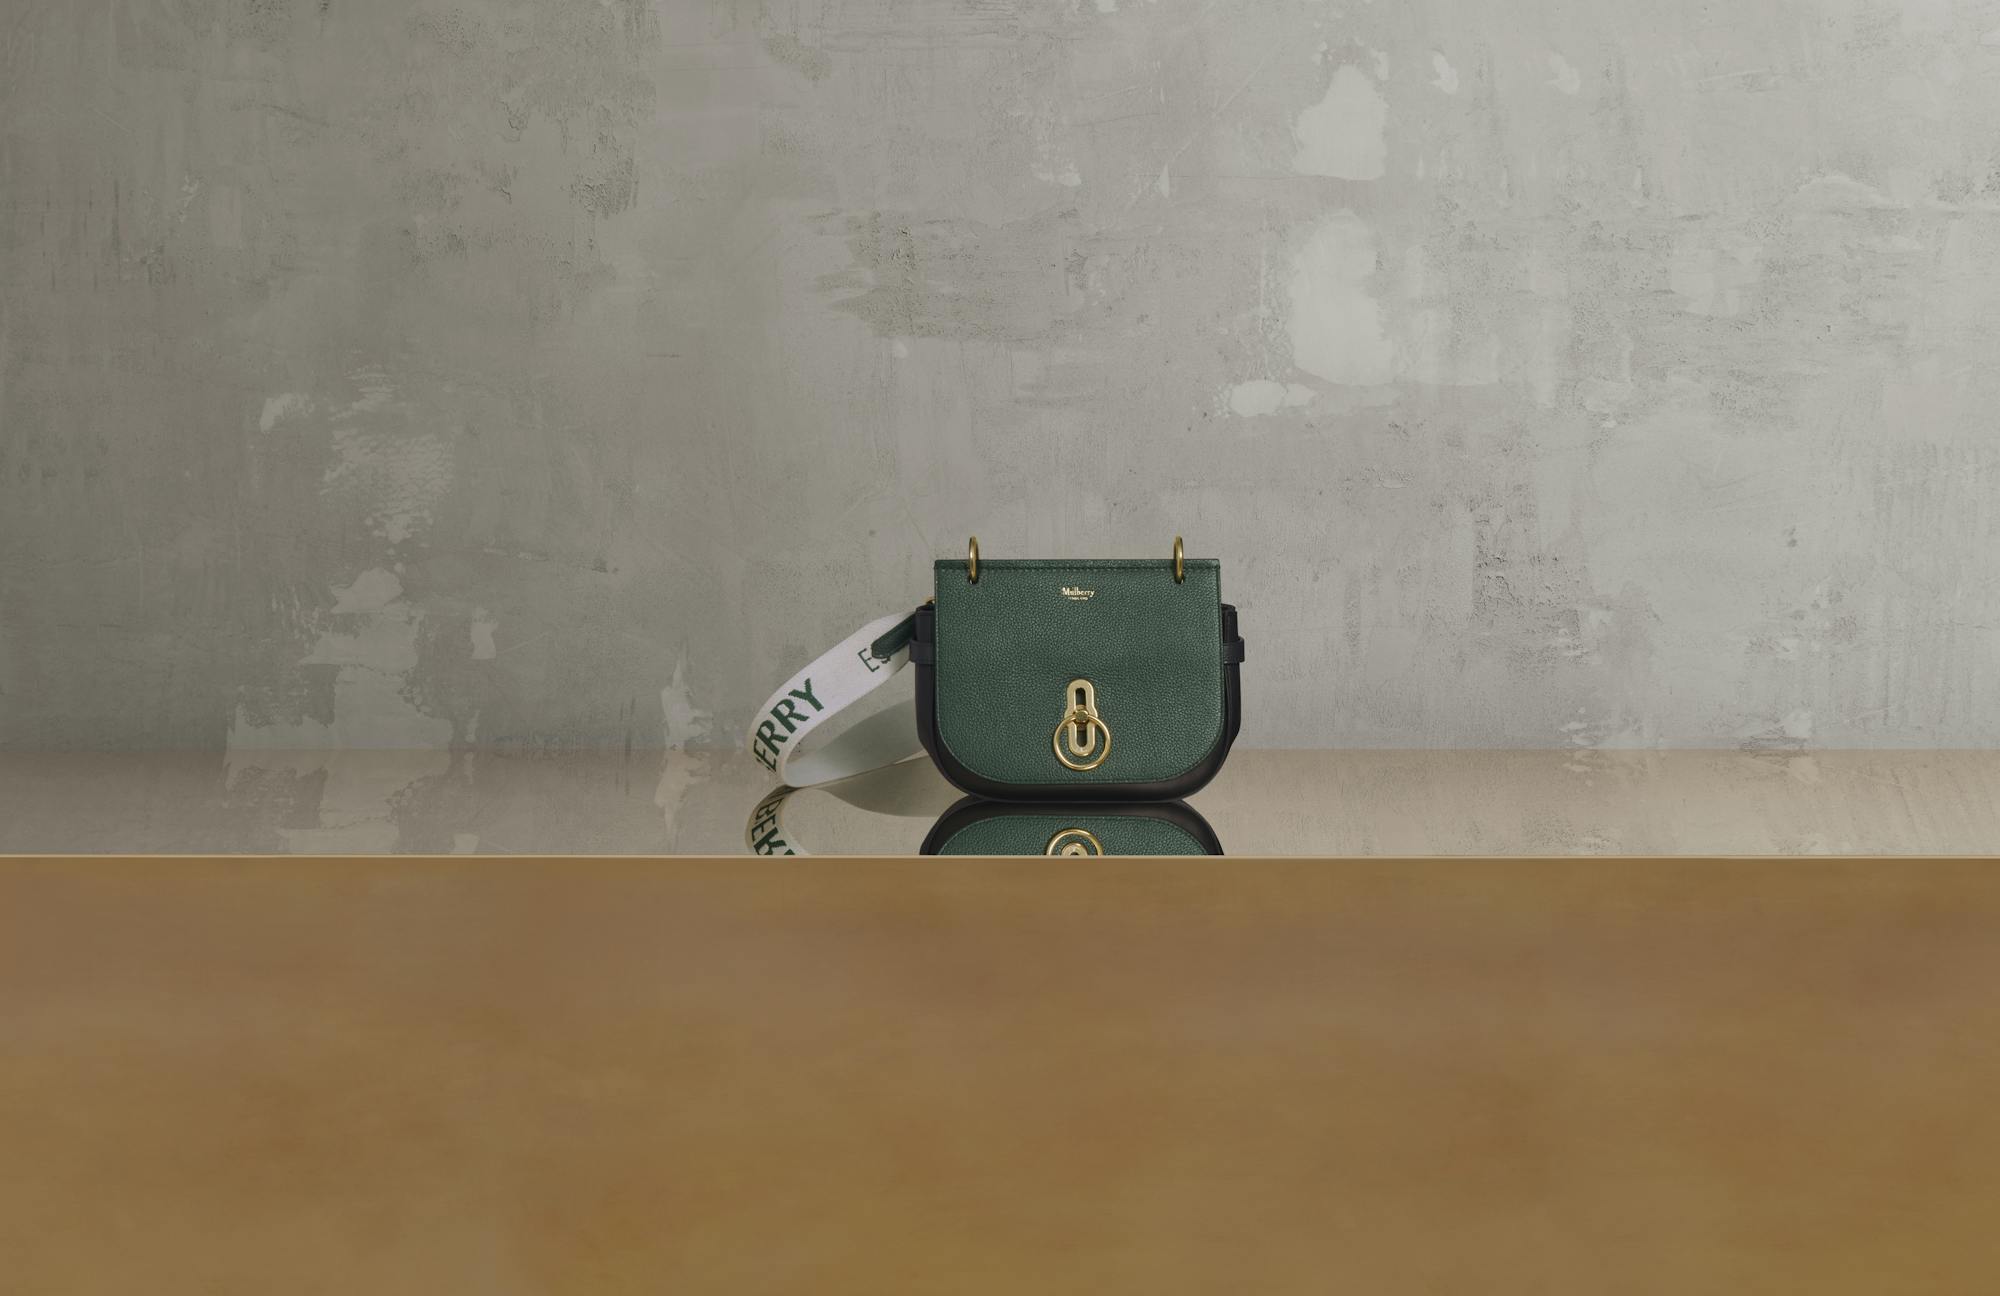 #MulberryGreen  Introducing the Mulberry Green collection 